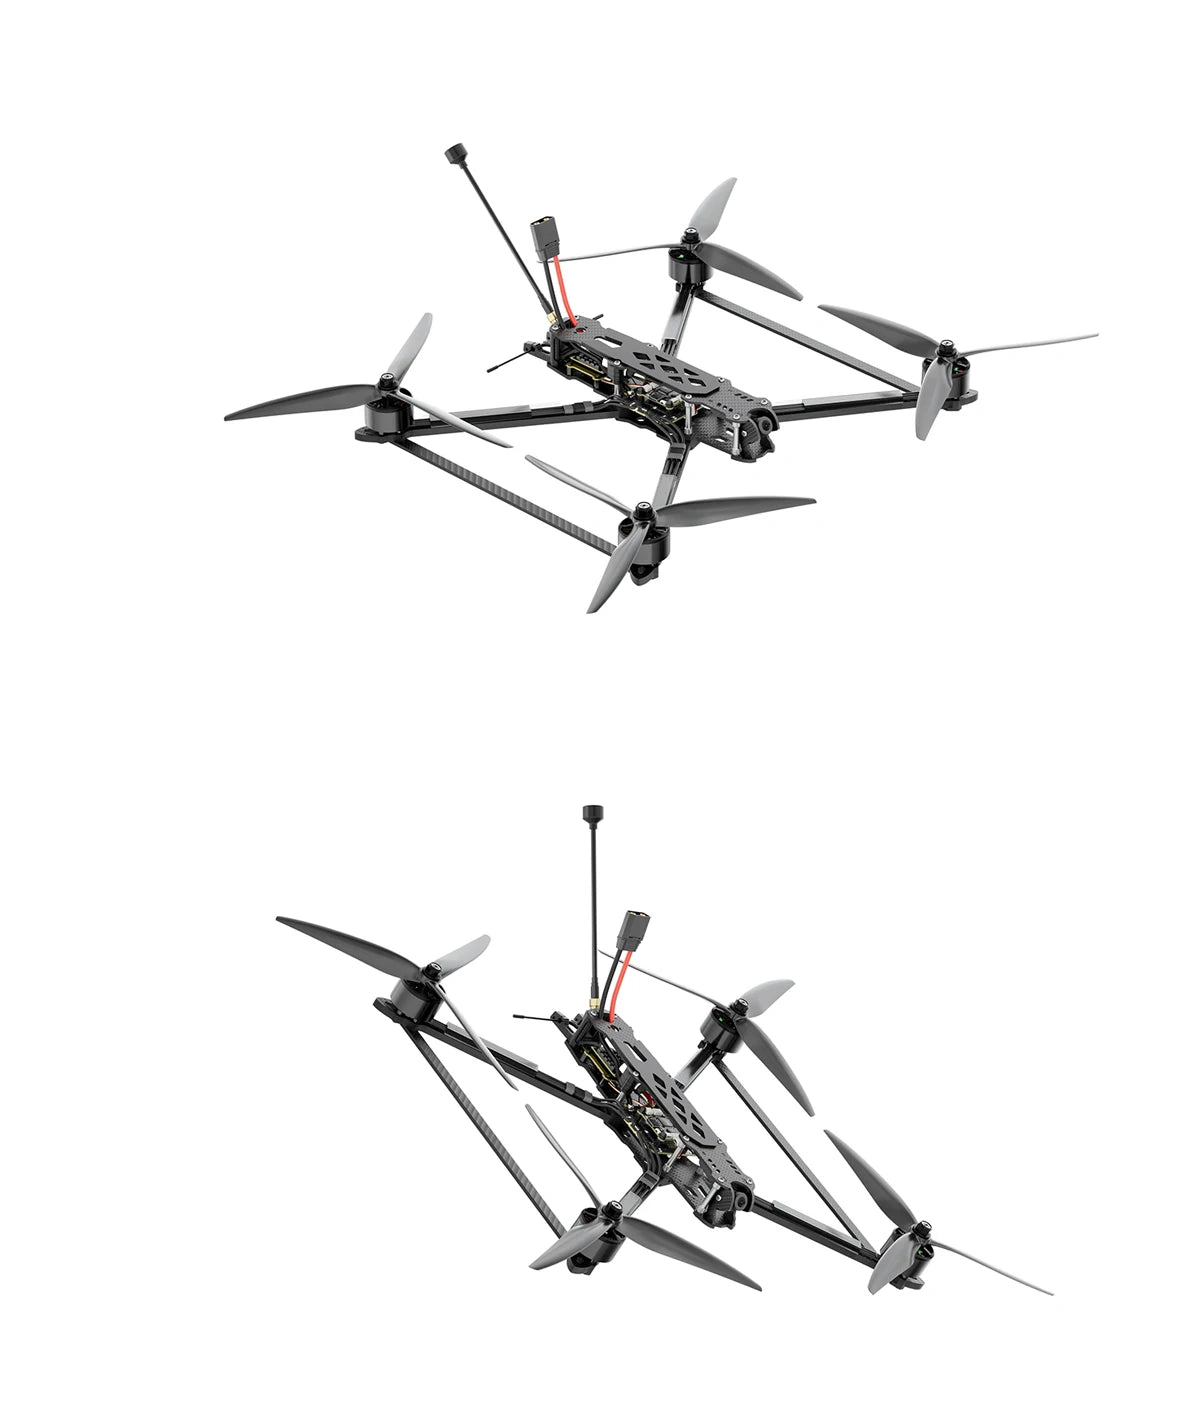 GEPRC MARK4 LR10 5.8G 1.6W Long Range 10inch FPV, please ensure that the model is securely connected before flying . all equipment is working properly, and